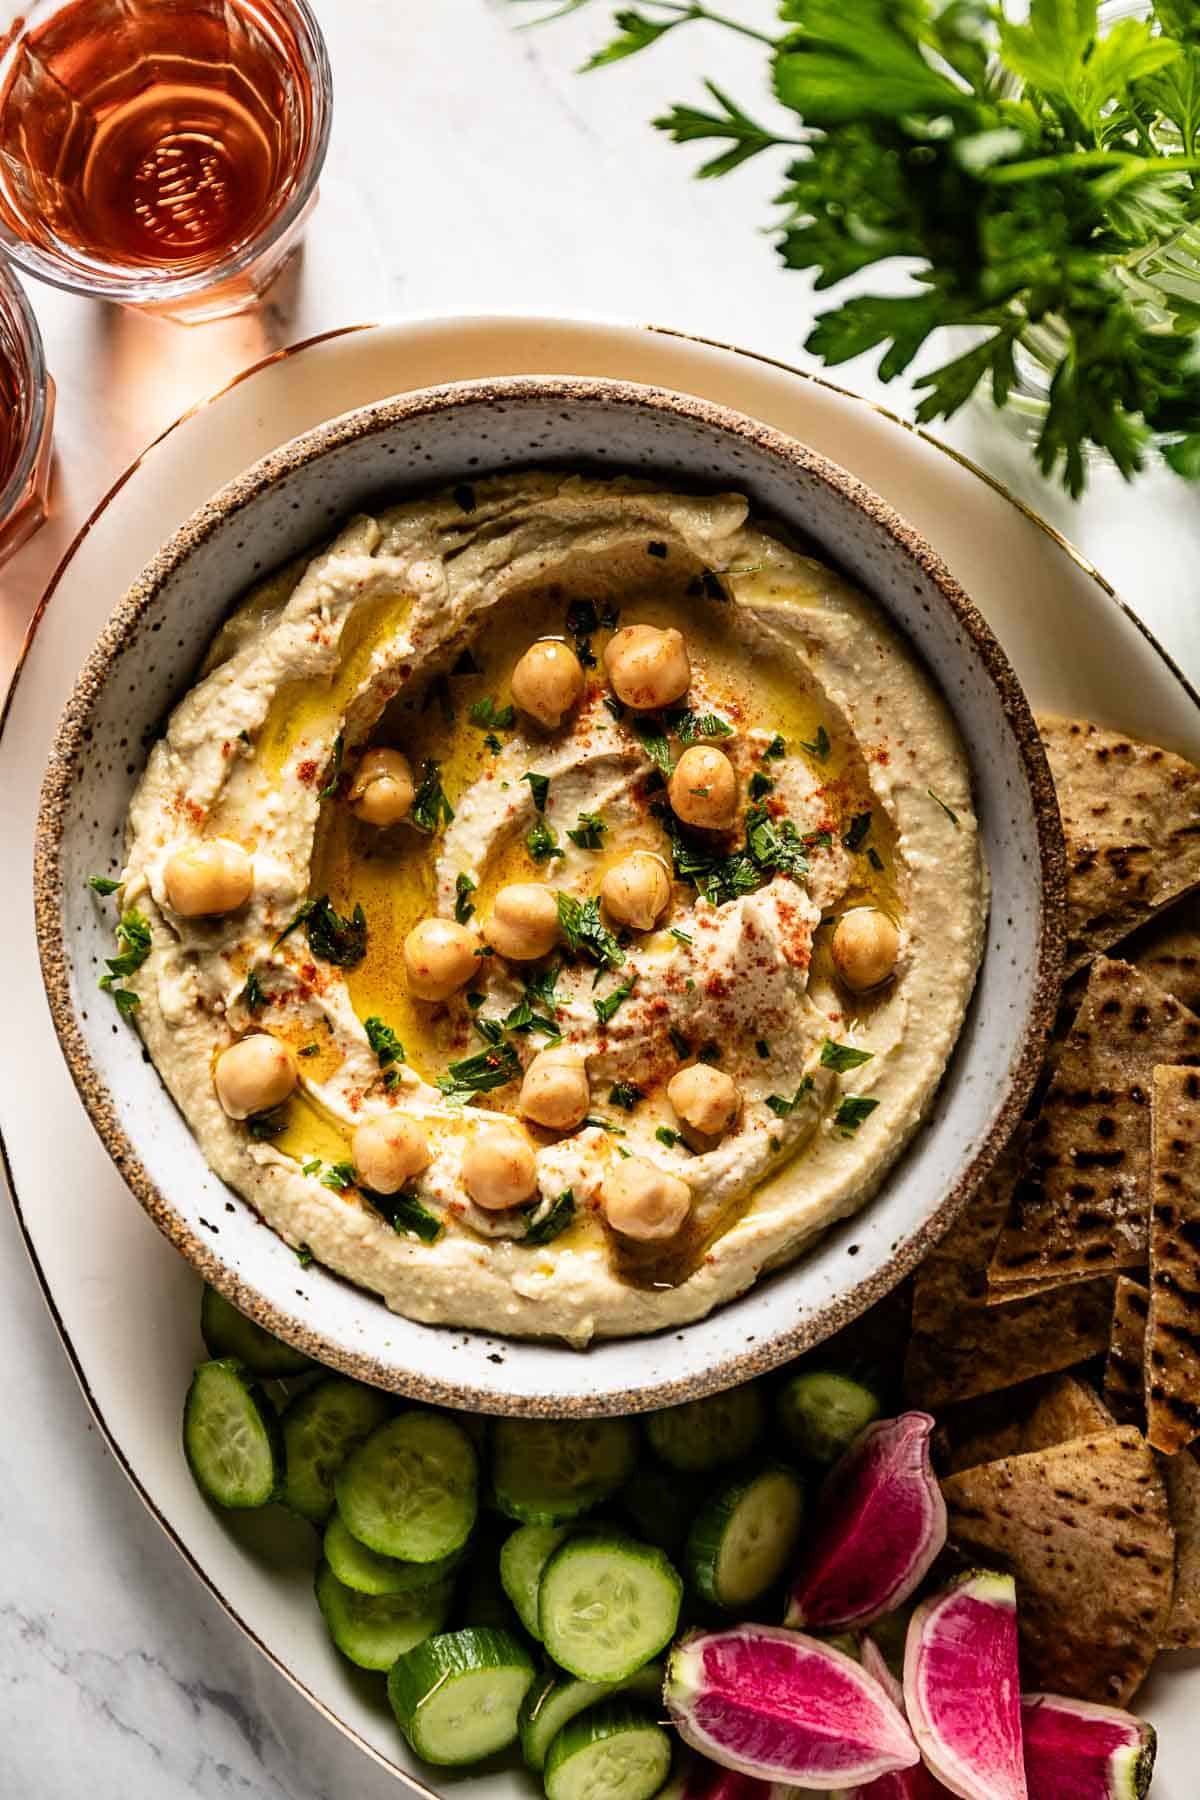 Its time to make hummus part of your diet!! - The Great Greek